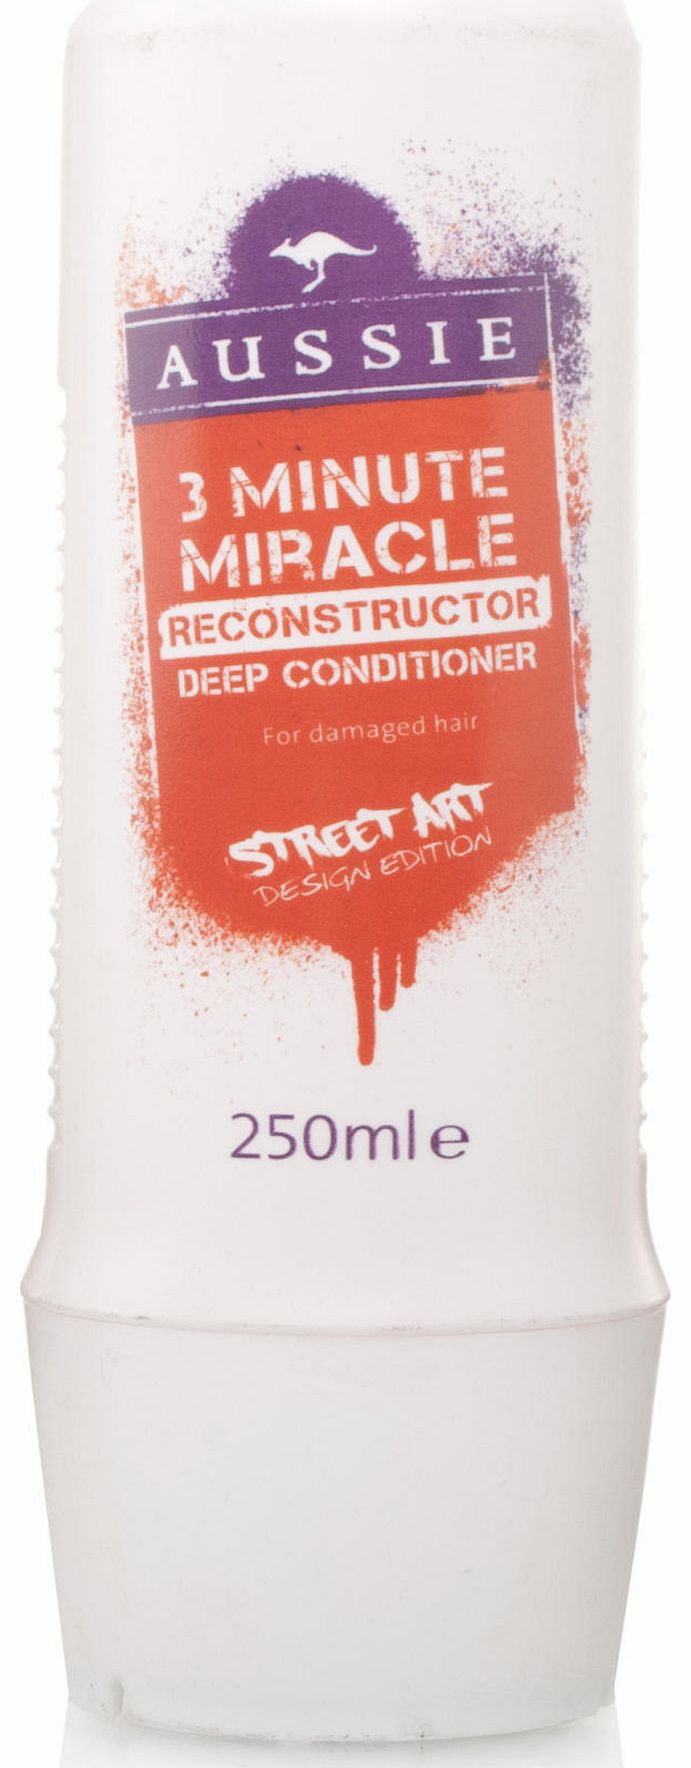 Aussie Reconstructor 3 Minute Miracle Deep